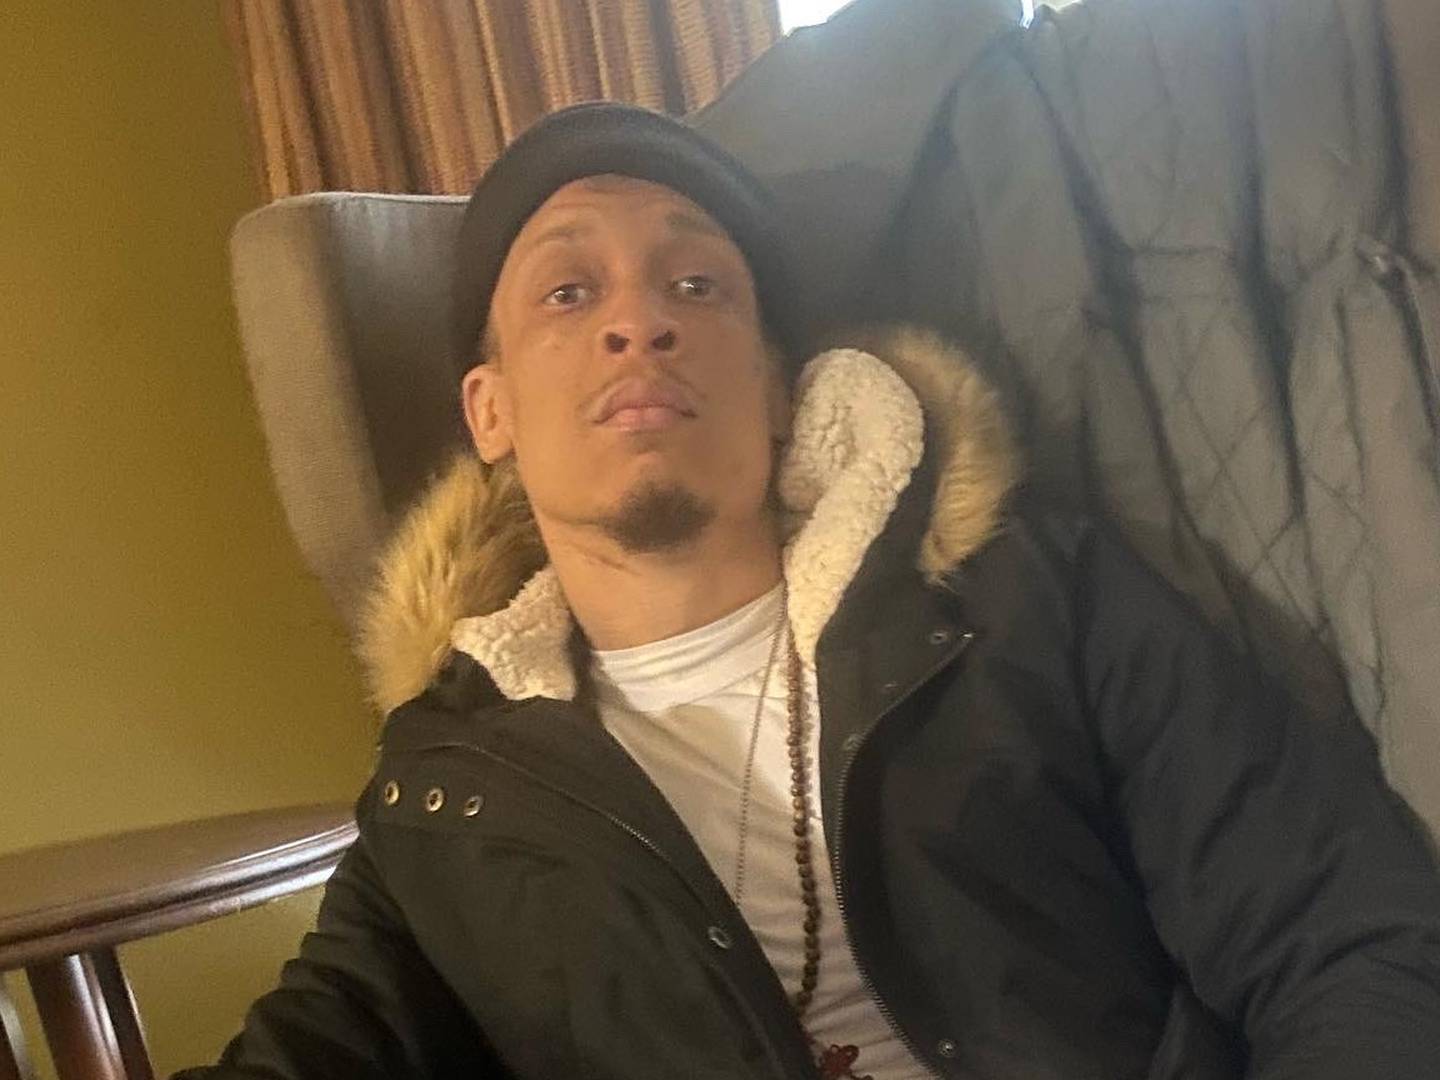 Chase M. Williams, 37, pictured shortly after his release from prison in December, was found dead at the Baltimore Central Booking and Intake Center on January 10. His sister, Nya Williams, described the death as suspicious. (Photo courtesy of the Williams family).